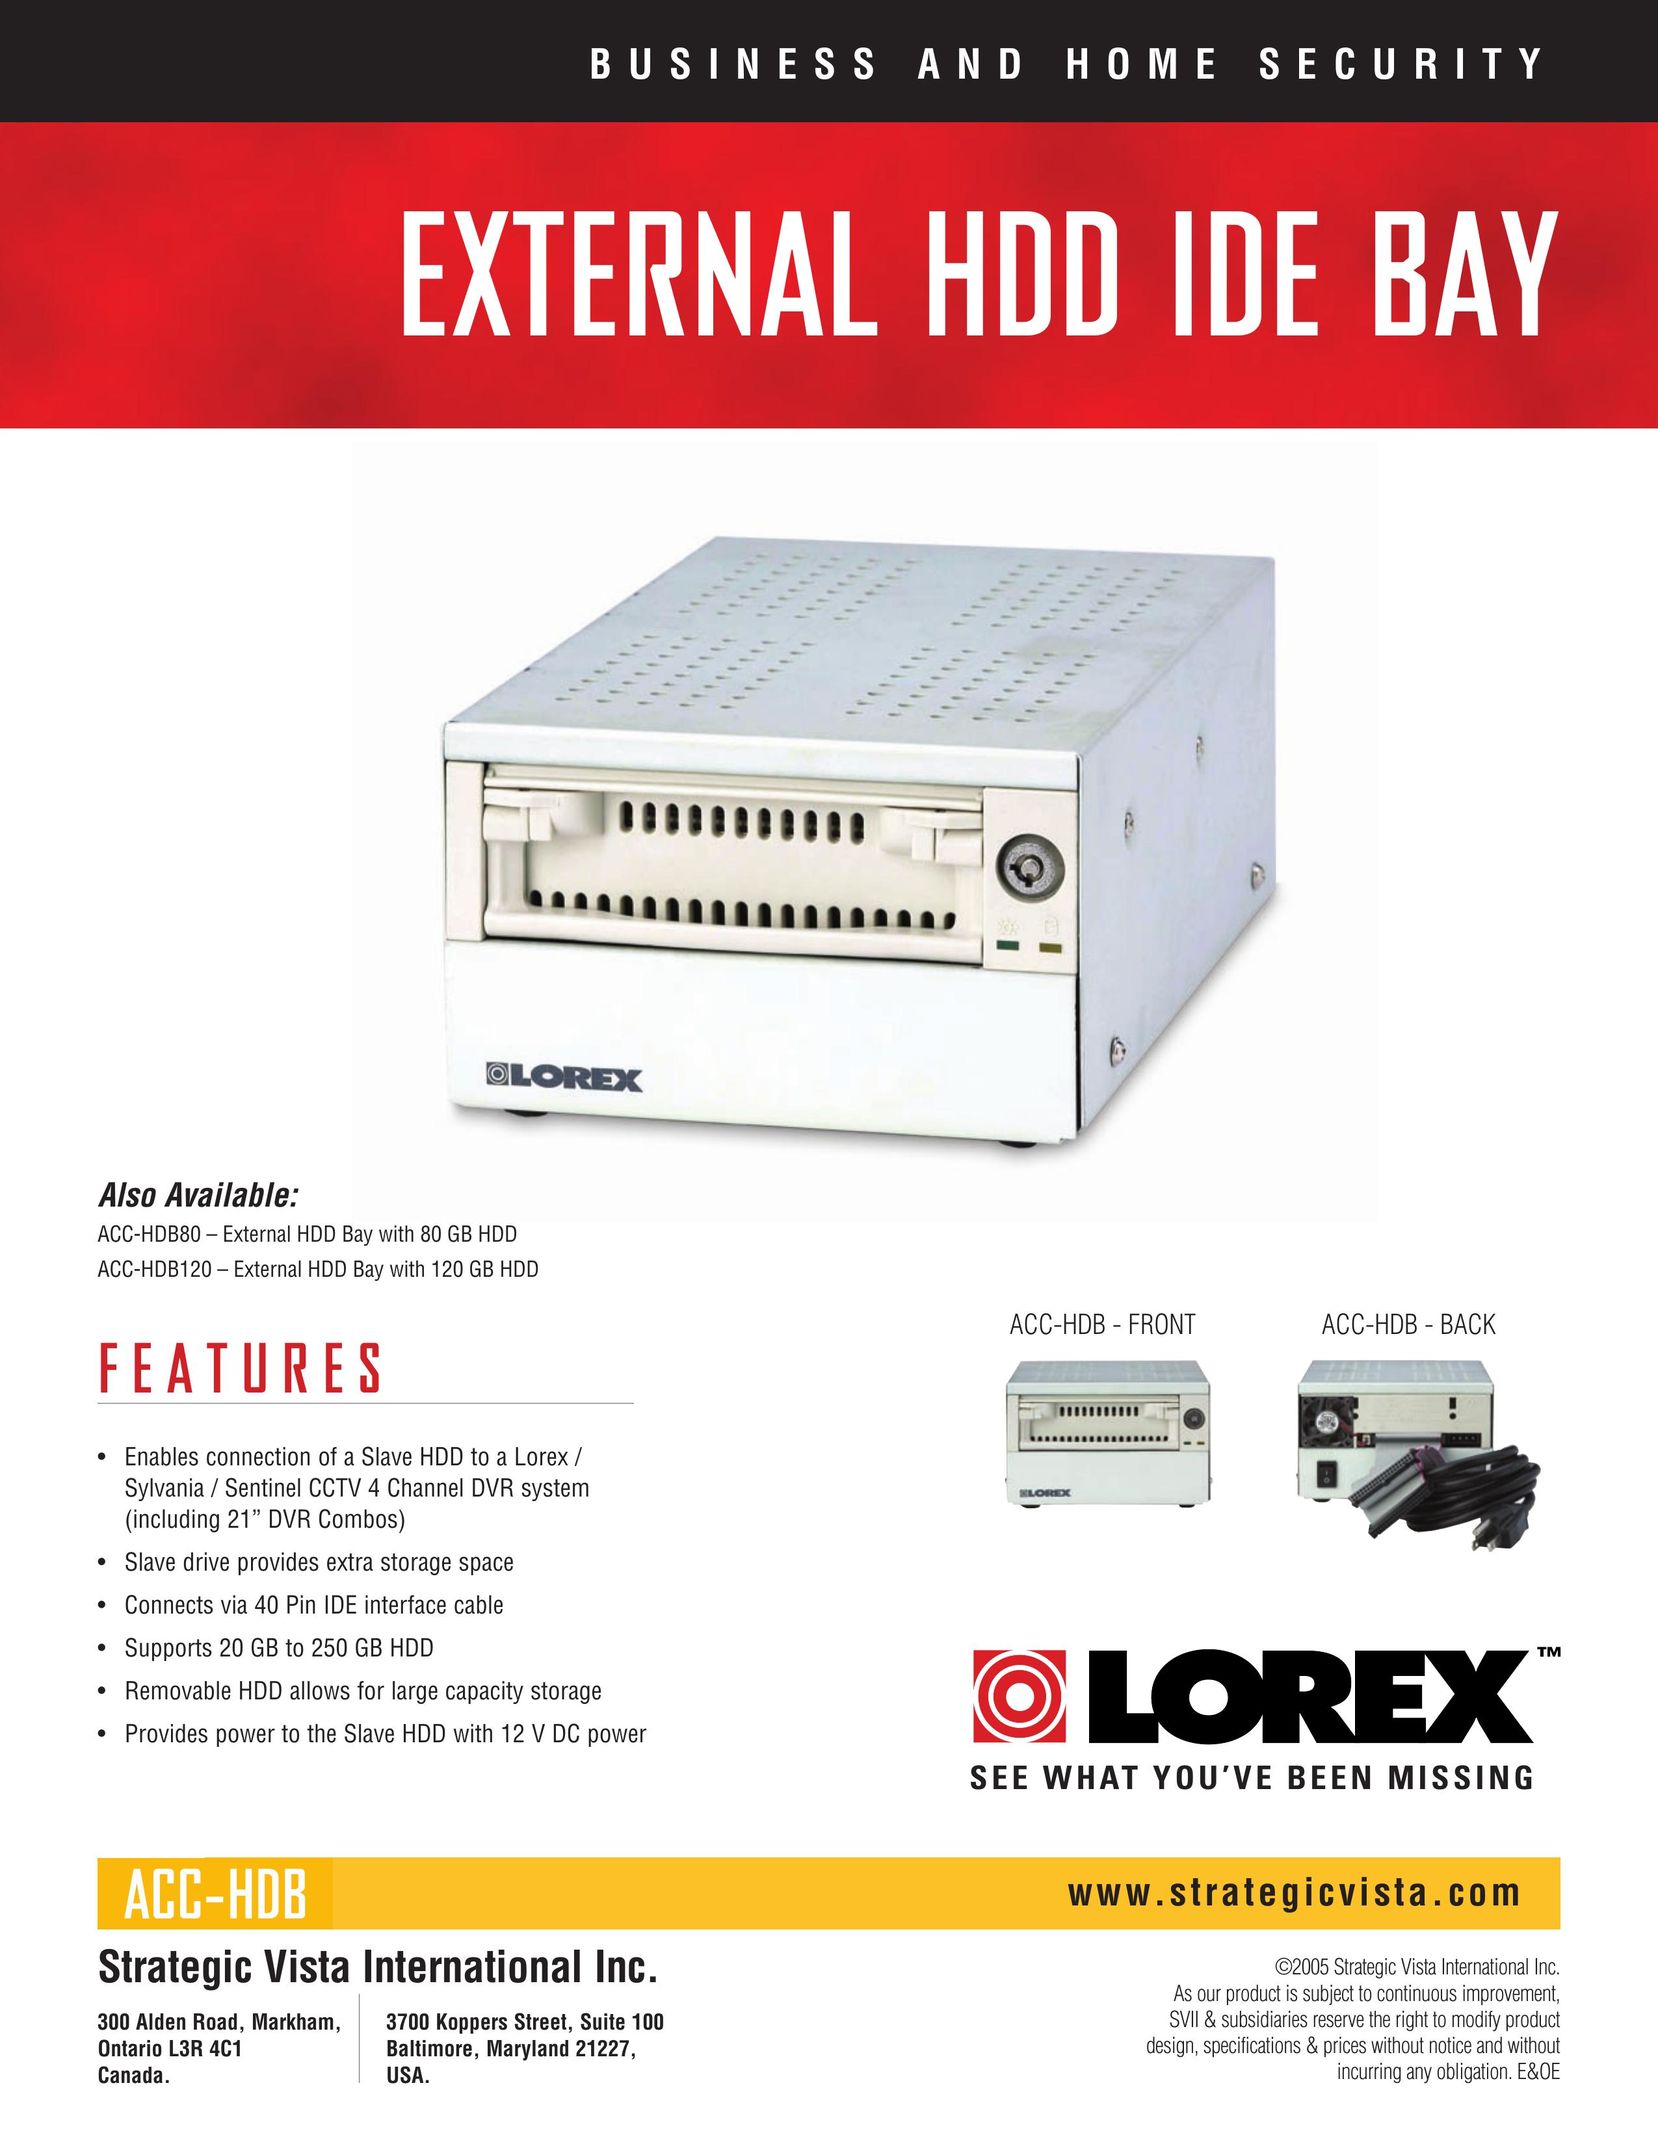 LOREX Technology ACC-HDB - BACK Home Security System User Manual